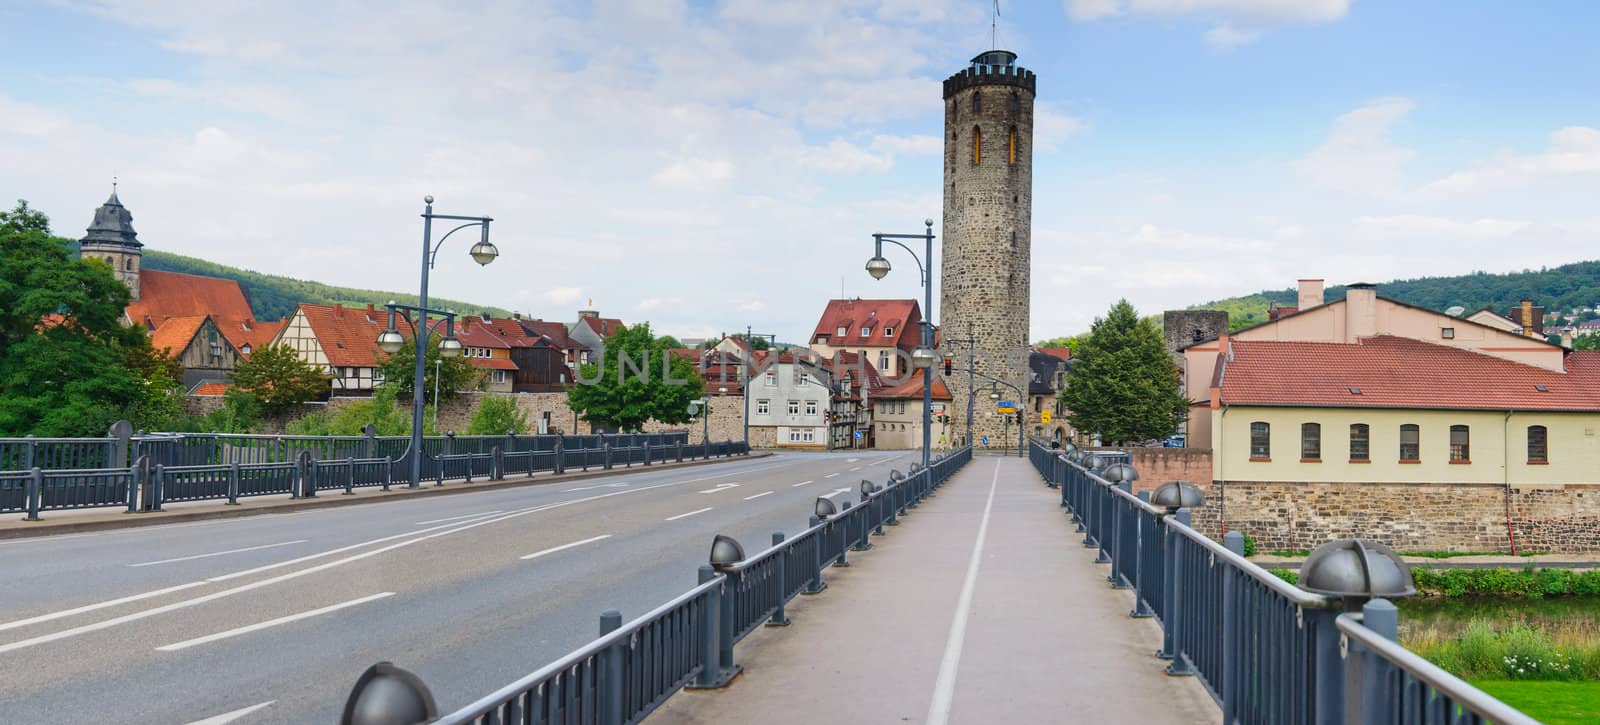 Bridge in the medieval half-timbered town in Germany